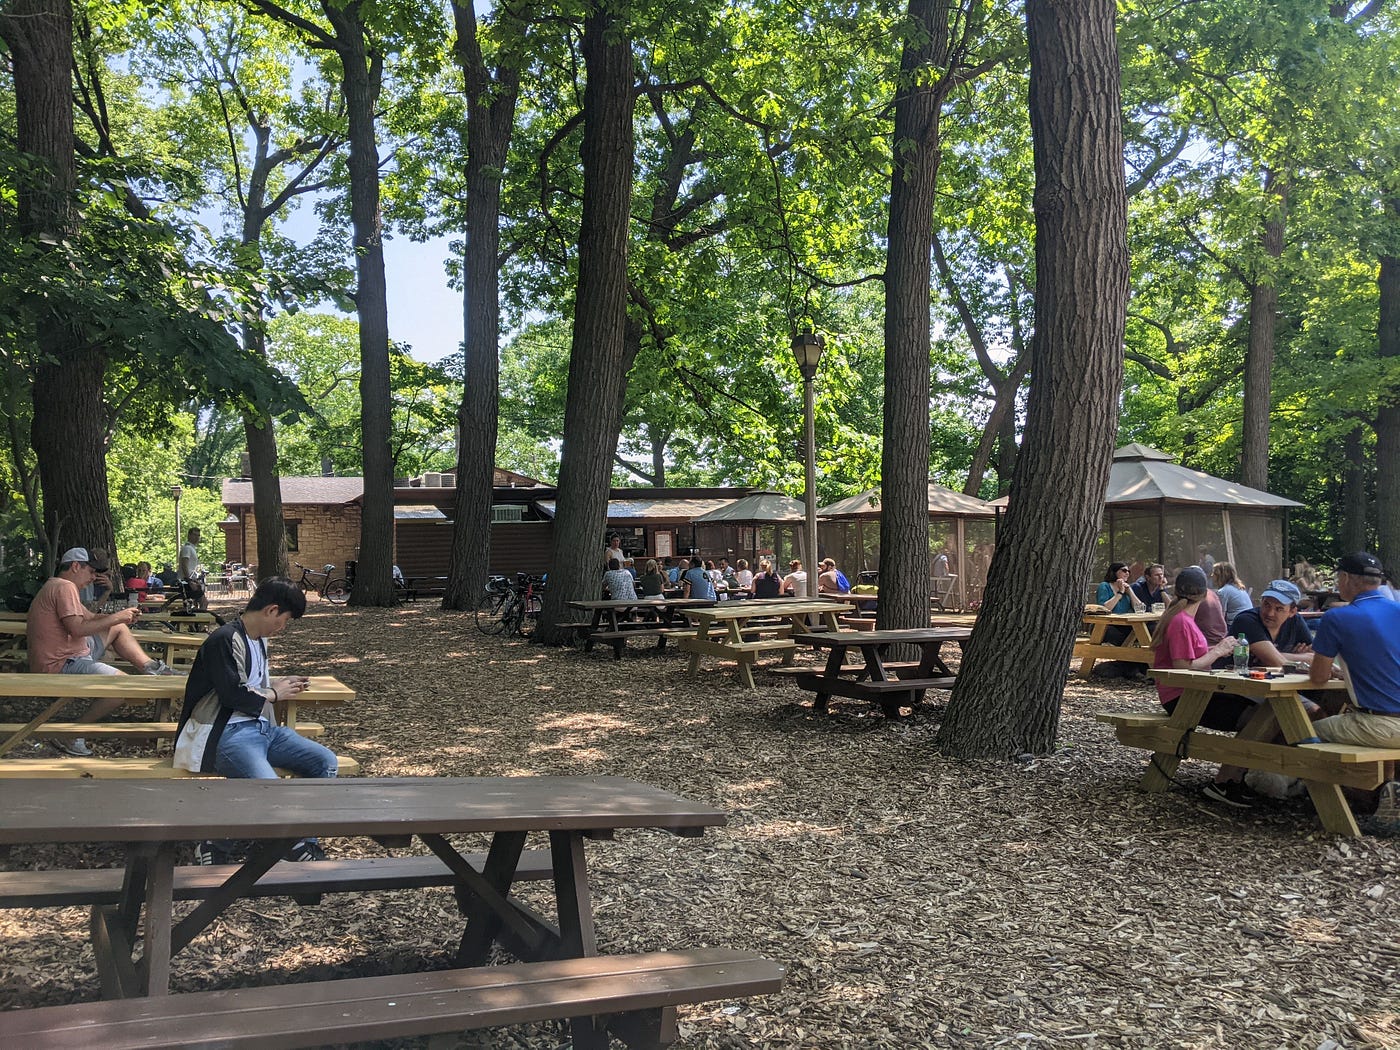 Hubbard Park Beer Garden in Shorewood, Wisconsin, a suburb of Milwaukee. Tall, leafy trees; the ground covered in wood chips; and picnic tables filled with people drinking beer.